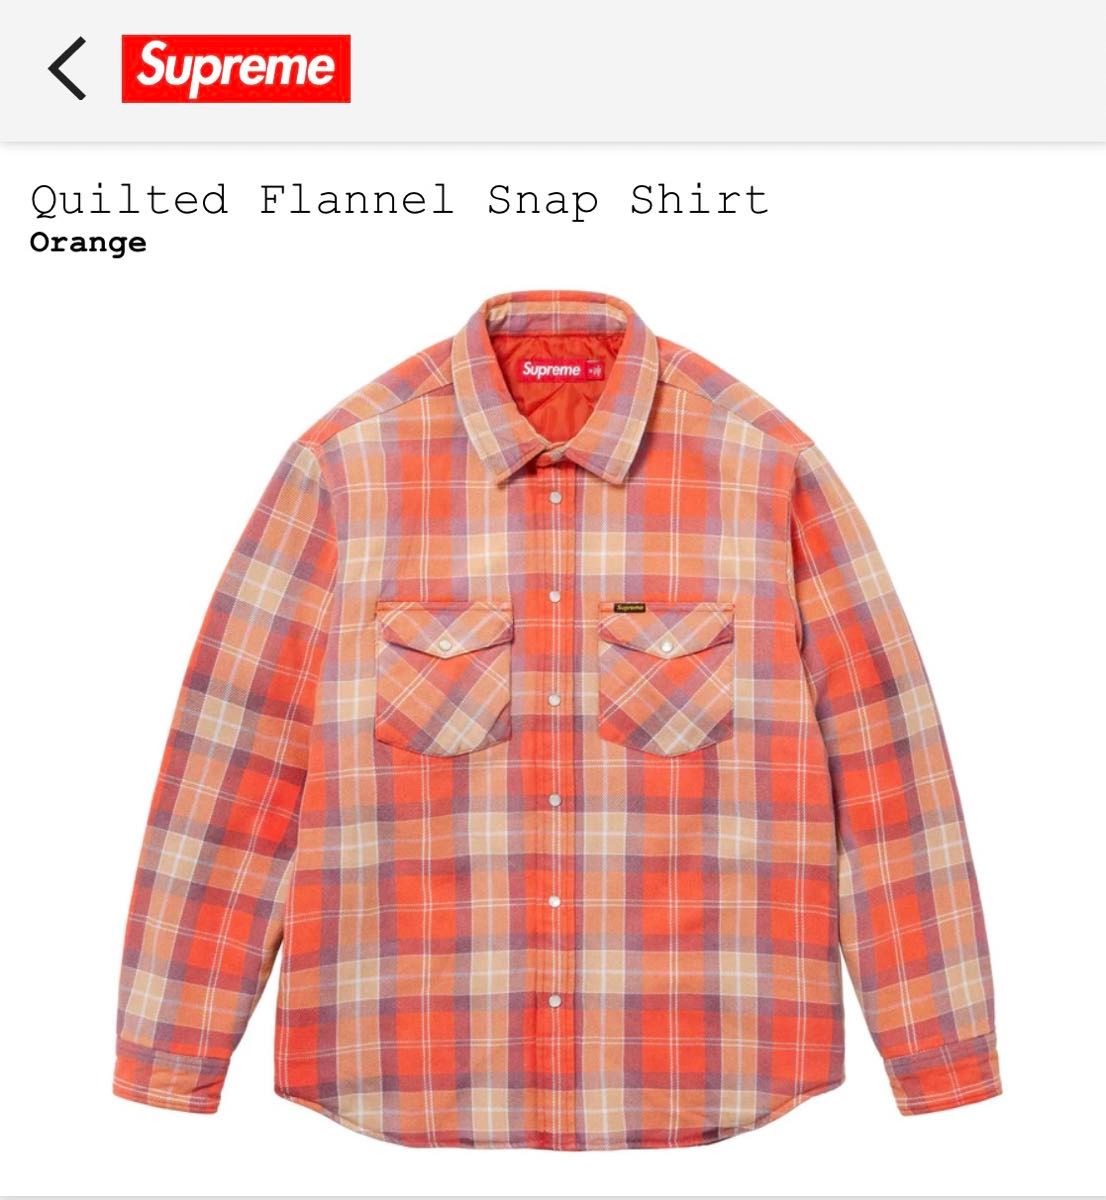 Supreme Quilted Flannel Snap Shirt Orange Msize